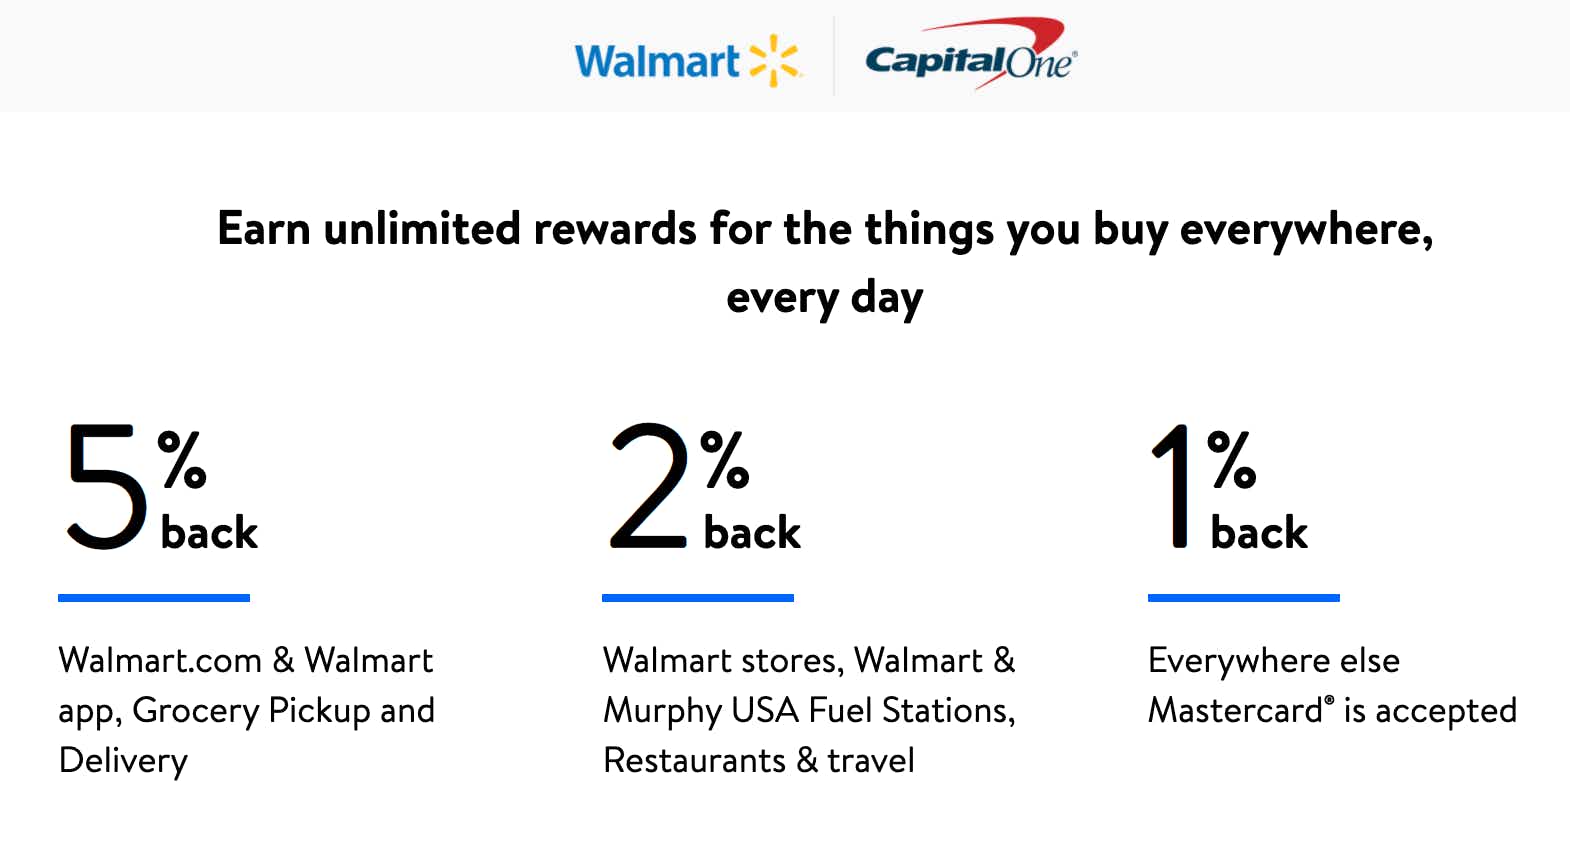 https://prod-cdn-thekrazycouponlady.imgix.net/wp-content/uploads/2020/04/walmart-grocery-pickup-1587664287-1587664287.png?auto=format&fit=fill&q=25